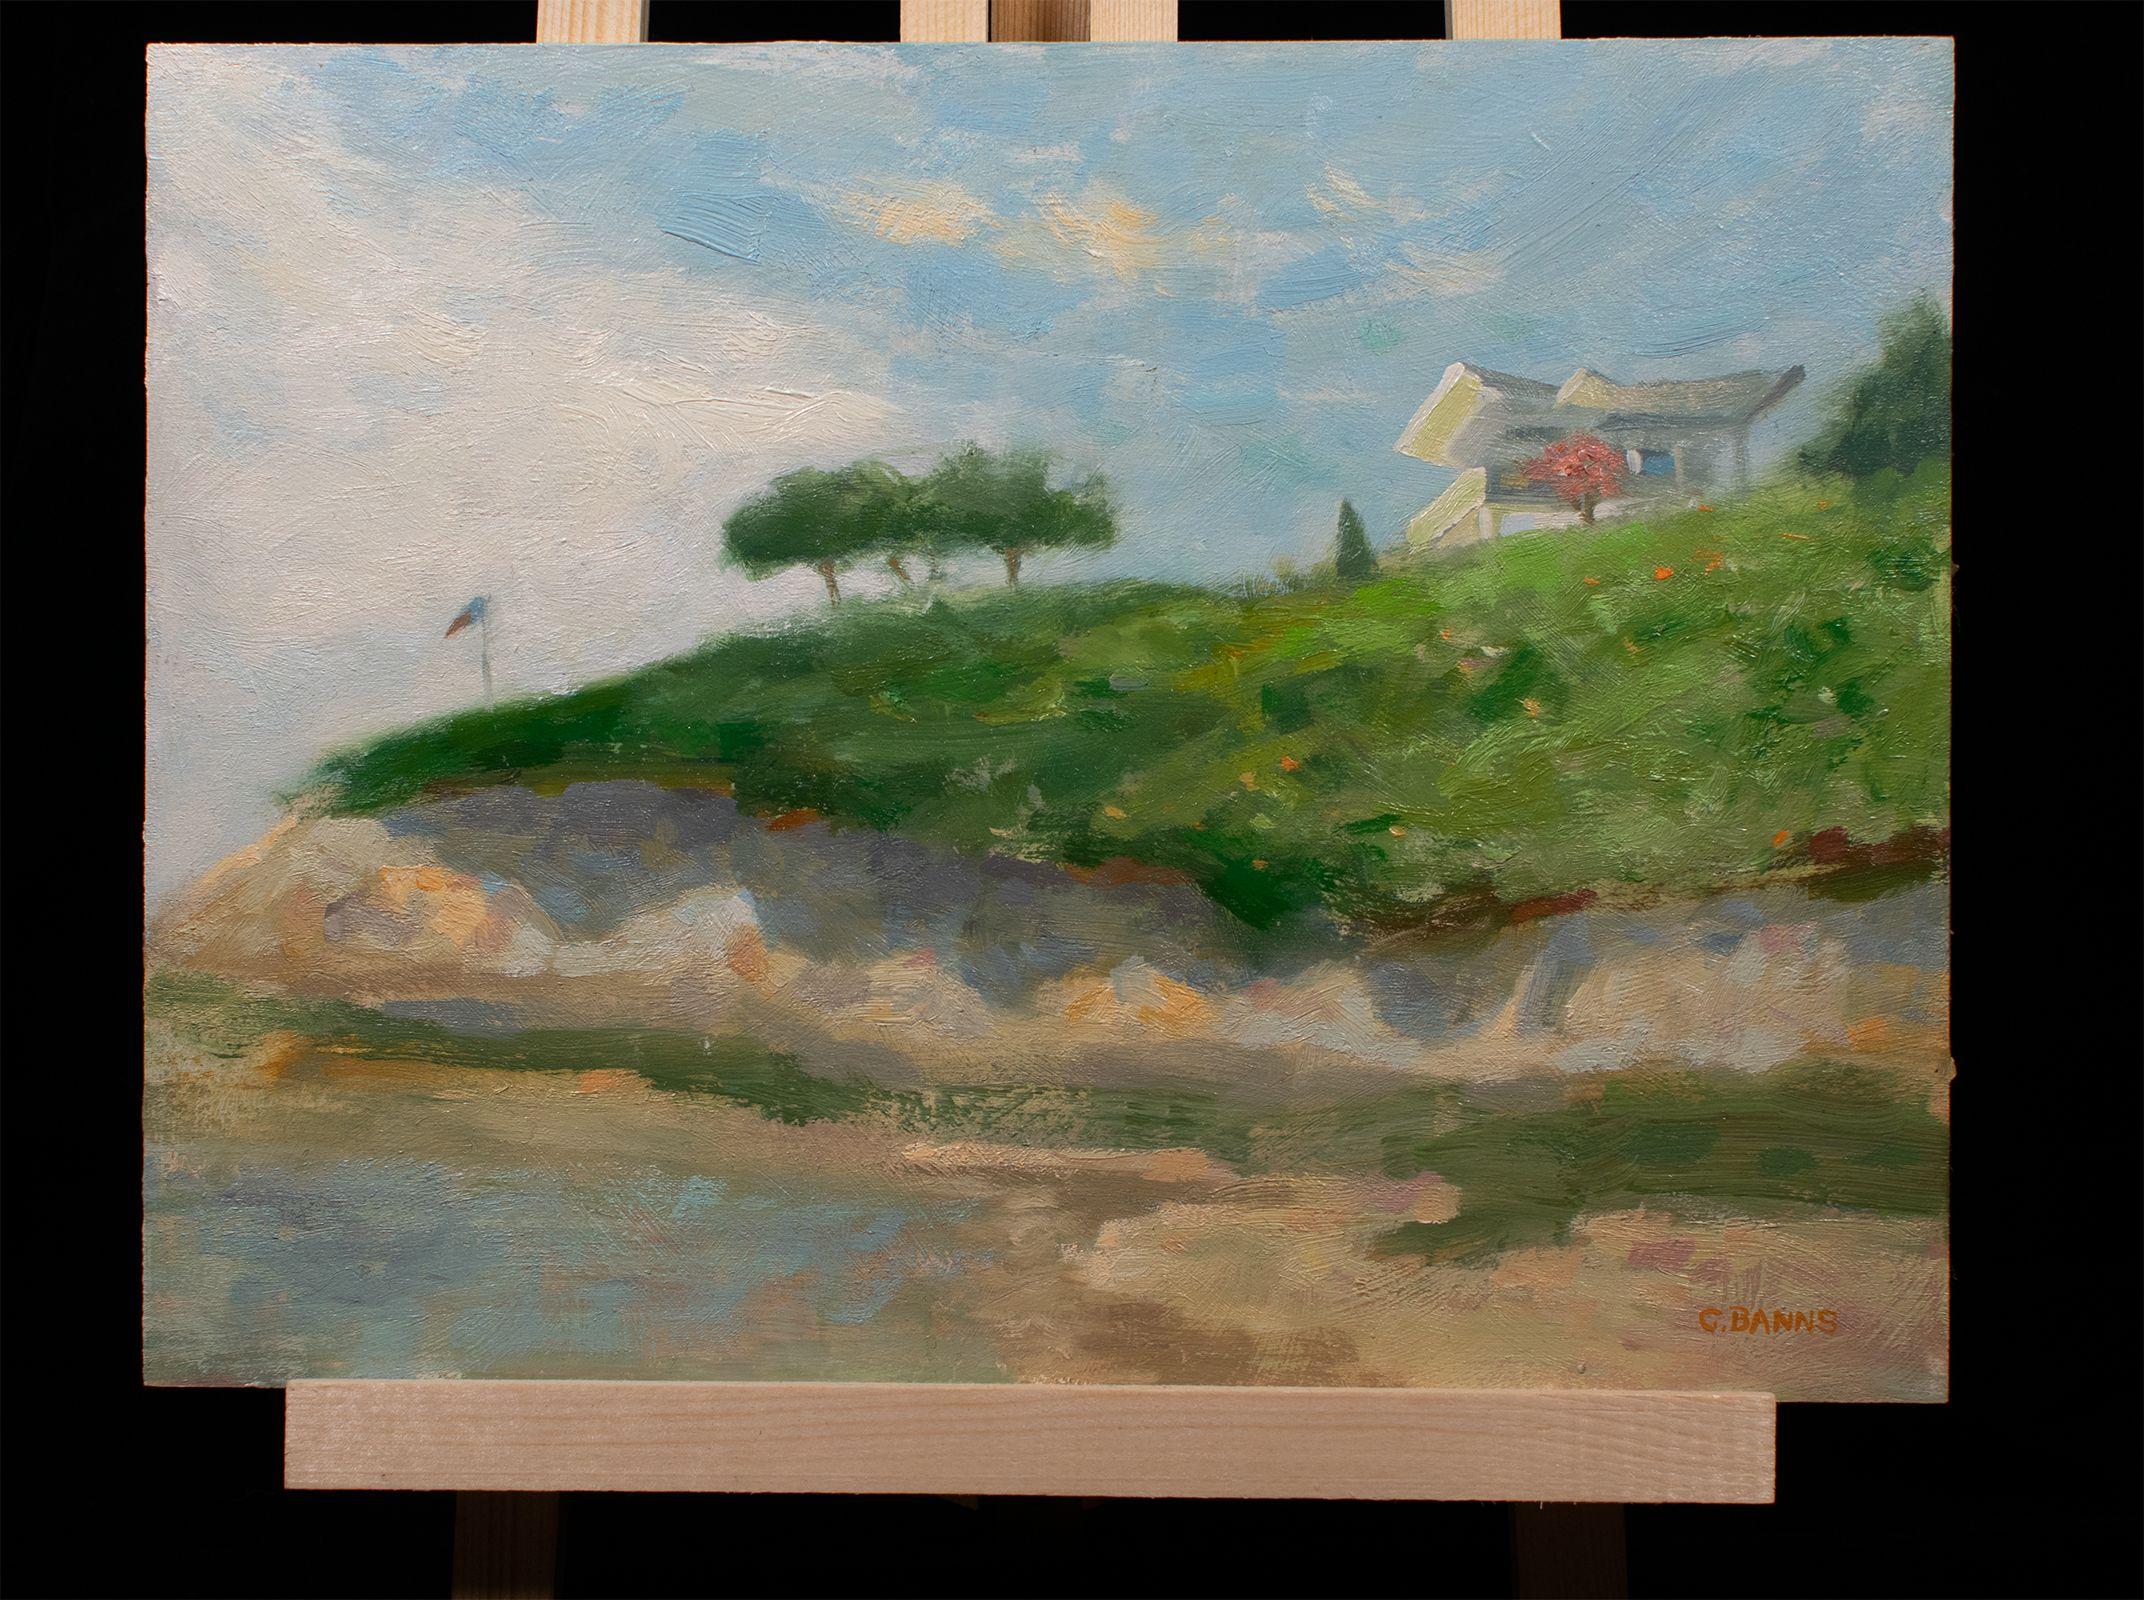 A house sitting on a cliff on the Charente-Maritime coast (west of France), painted in oils in an impressionistic manner, on a primed wood panel. Left to dry for a year before varnishing. :: Painting :: Impressionist :: This piece comes with an